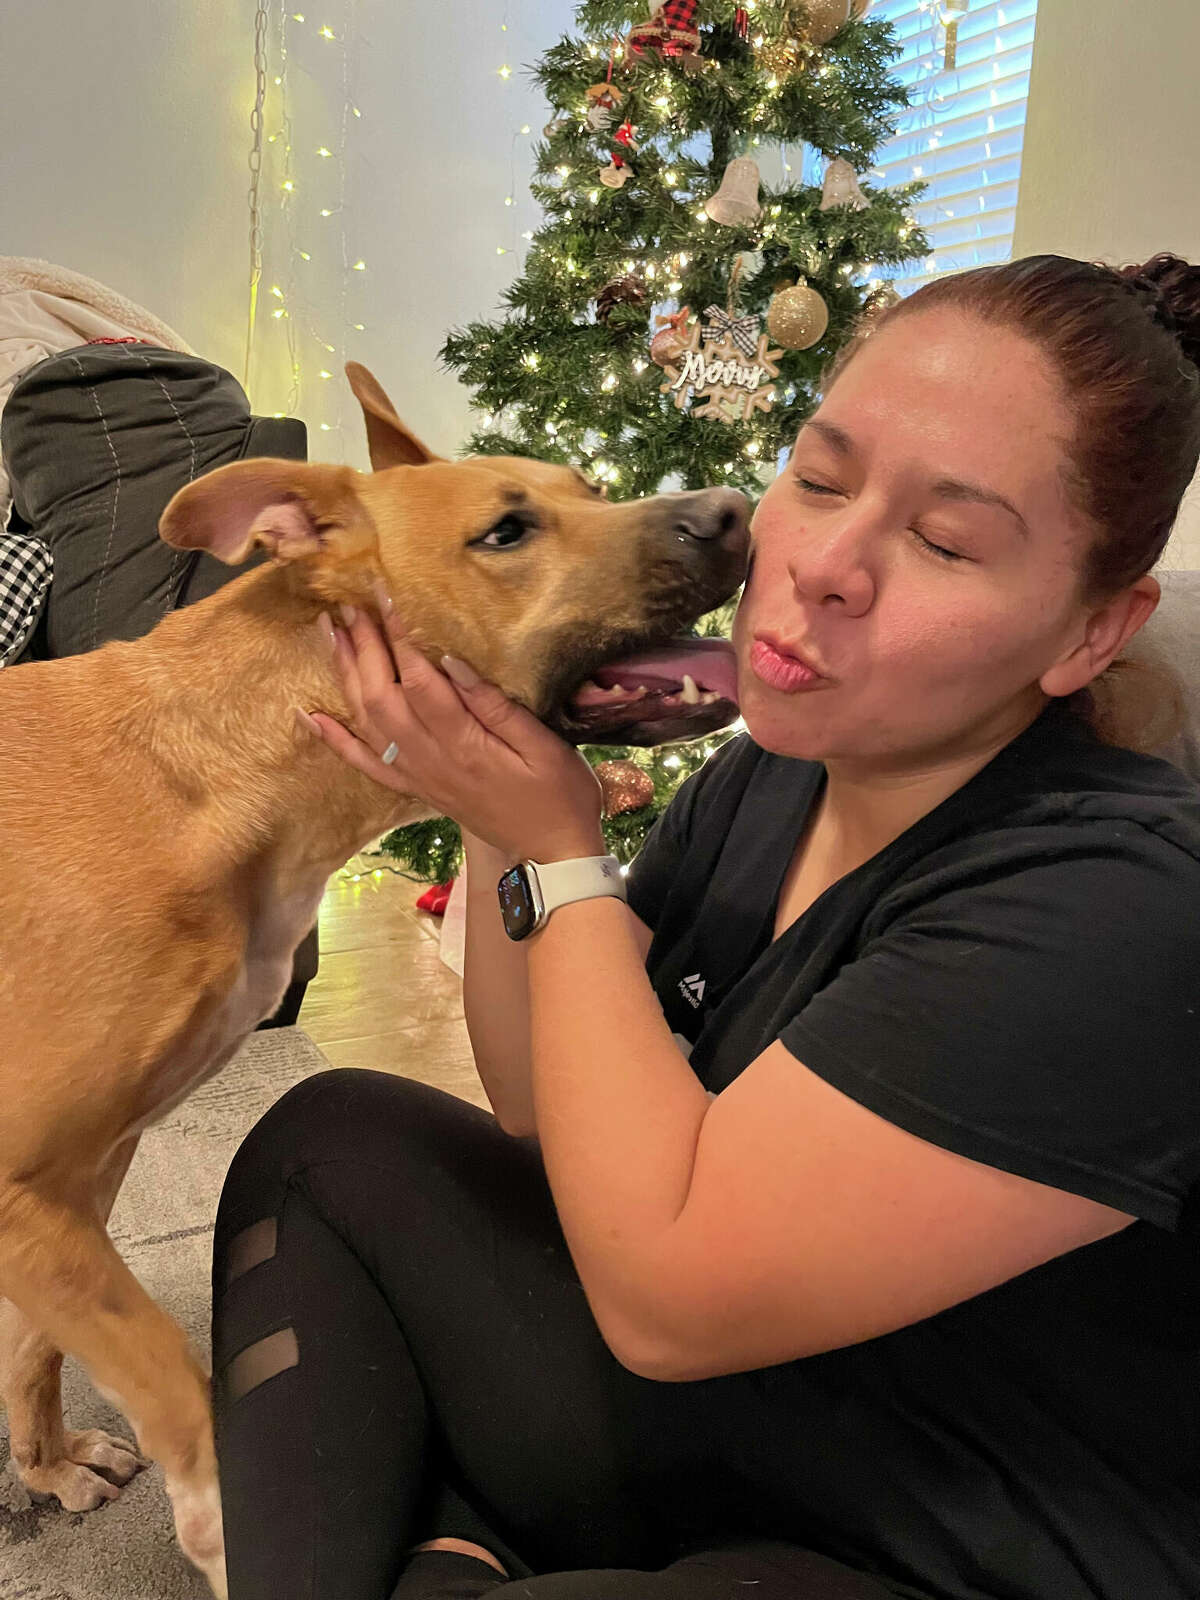 Aldape urges pet owners to register thier dogs and cats with a chip. She took it for granted, she said, that because Cookie was an indoor dog she was safe.  "You never know," she said. 